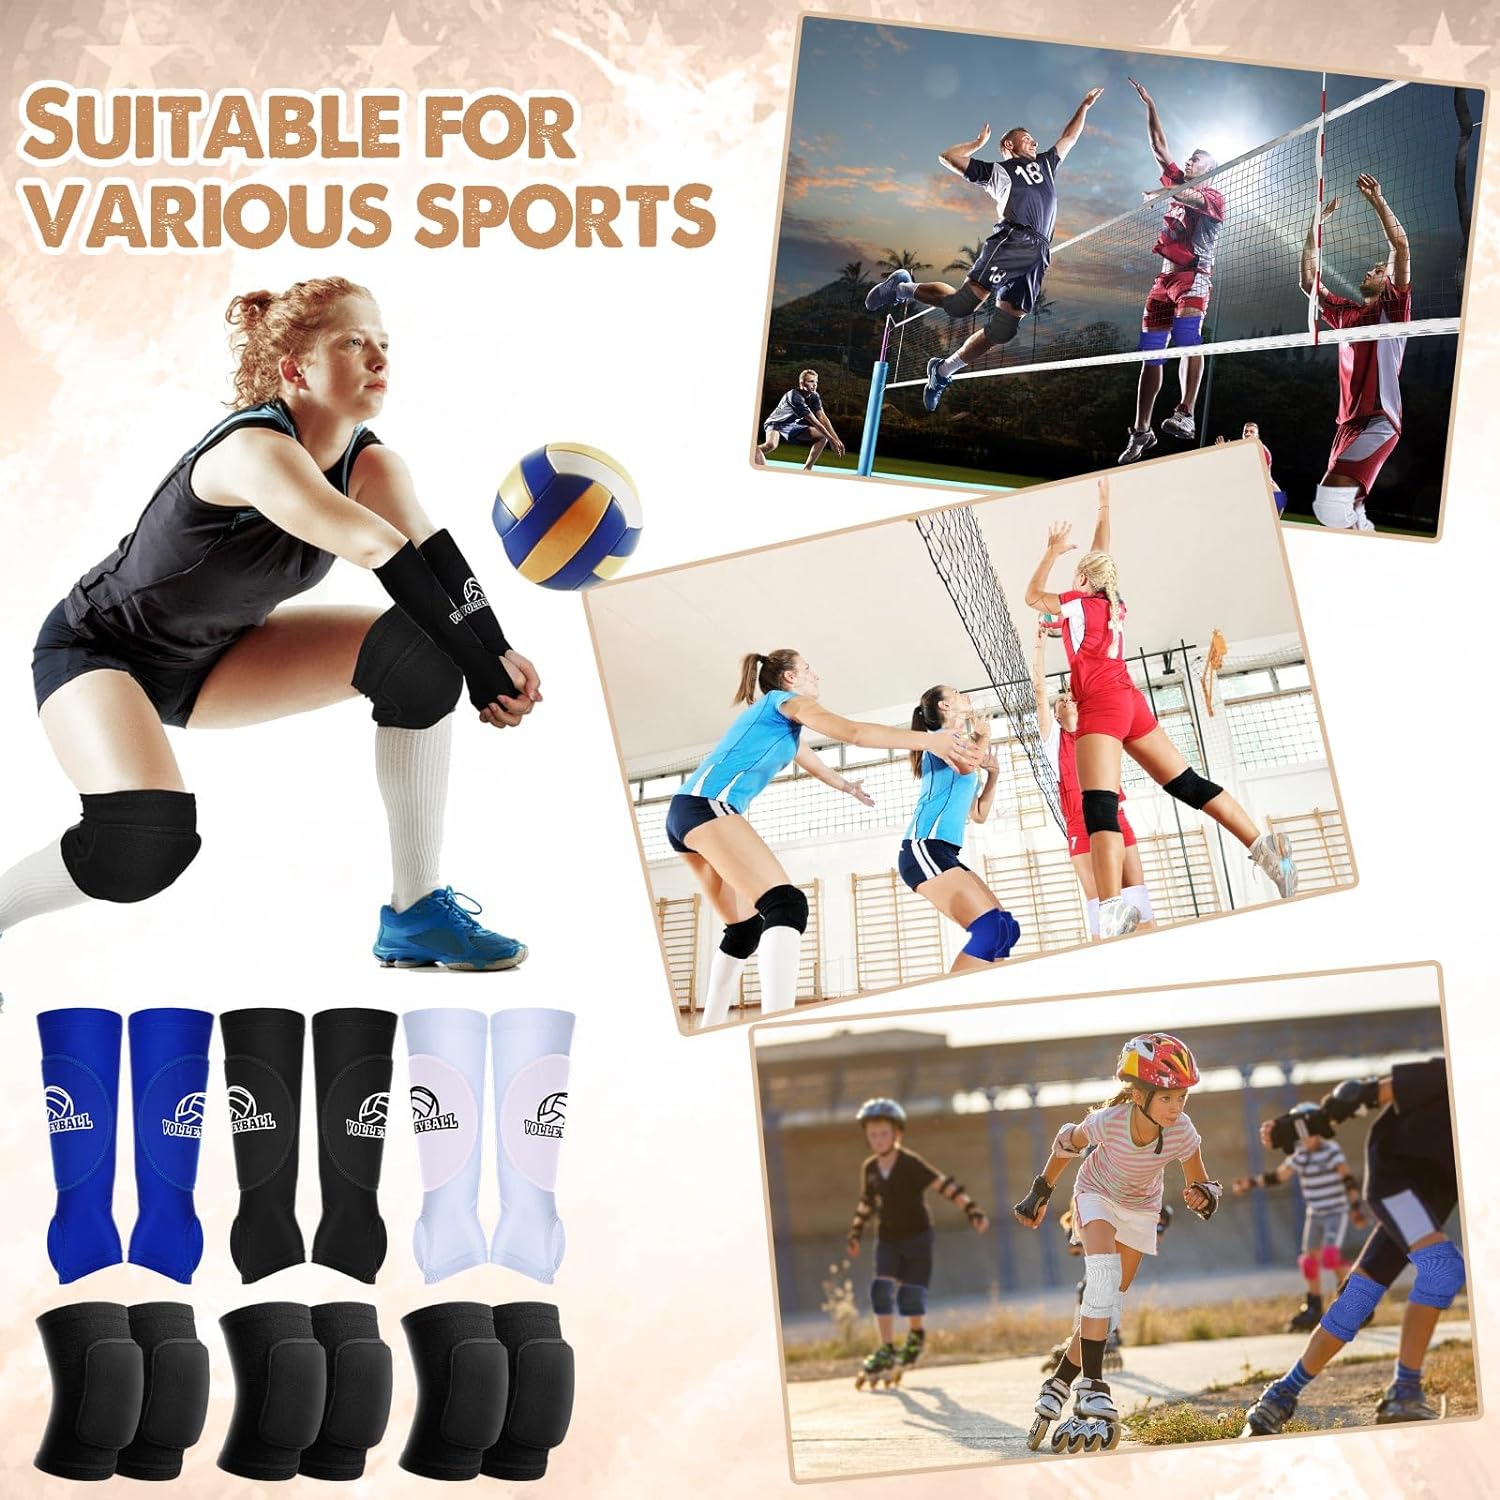 Breathffy 6 Pairs Volleyball Knee Pads and 6 Pairs Volleyball Padded Passing Sleeves Protective Knee Brace Forearm Elbow Sleeve for Youth Teen Train Accessories